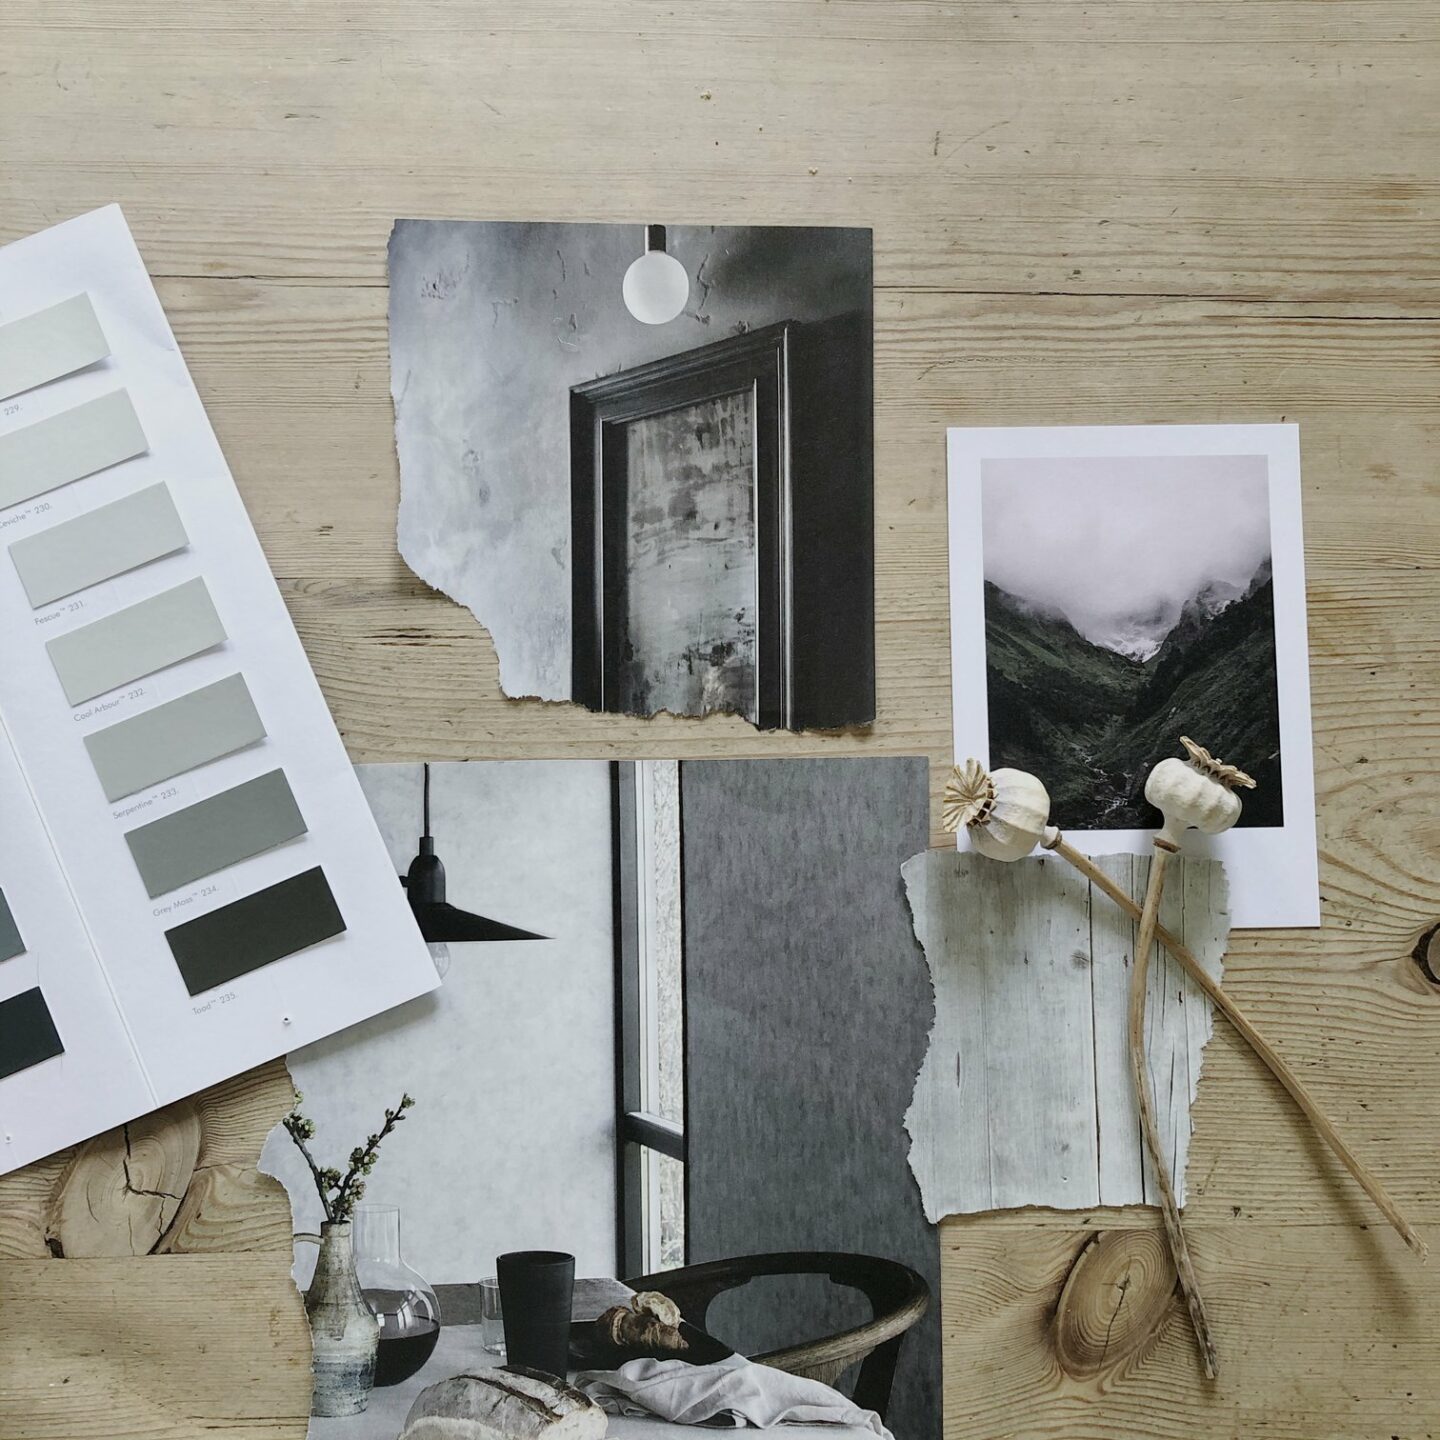 Flatlay moodboard of interiors images